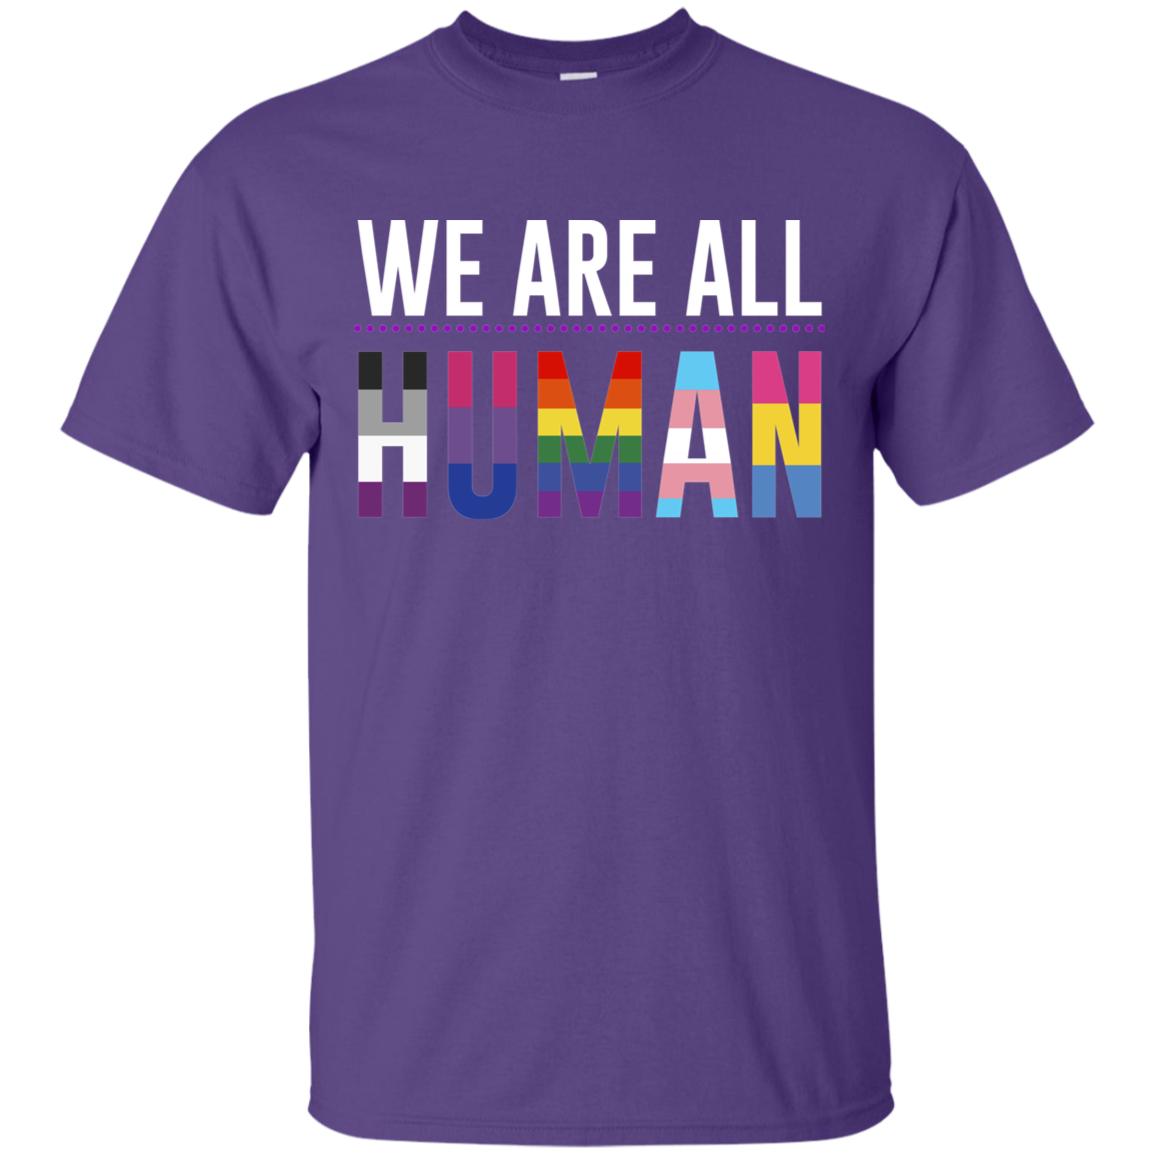 We Are All Human purple T Shirt for men, half sleeves round neck tshirt for men